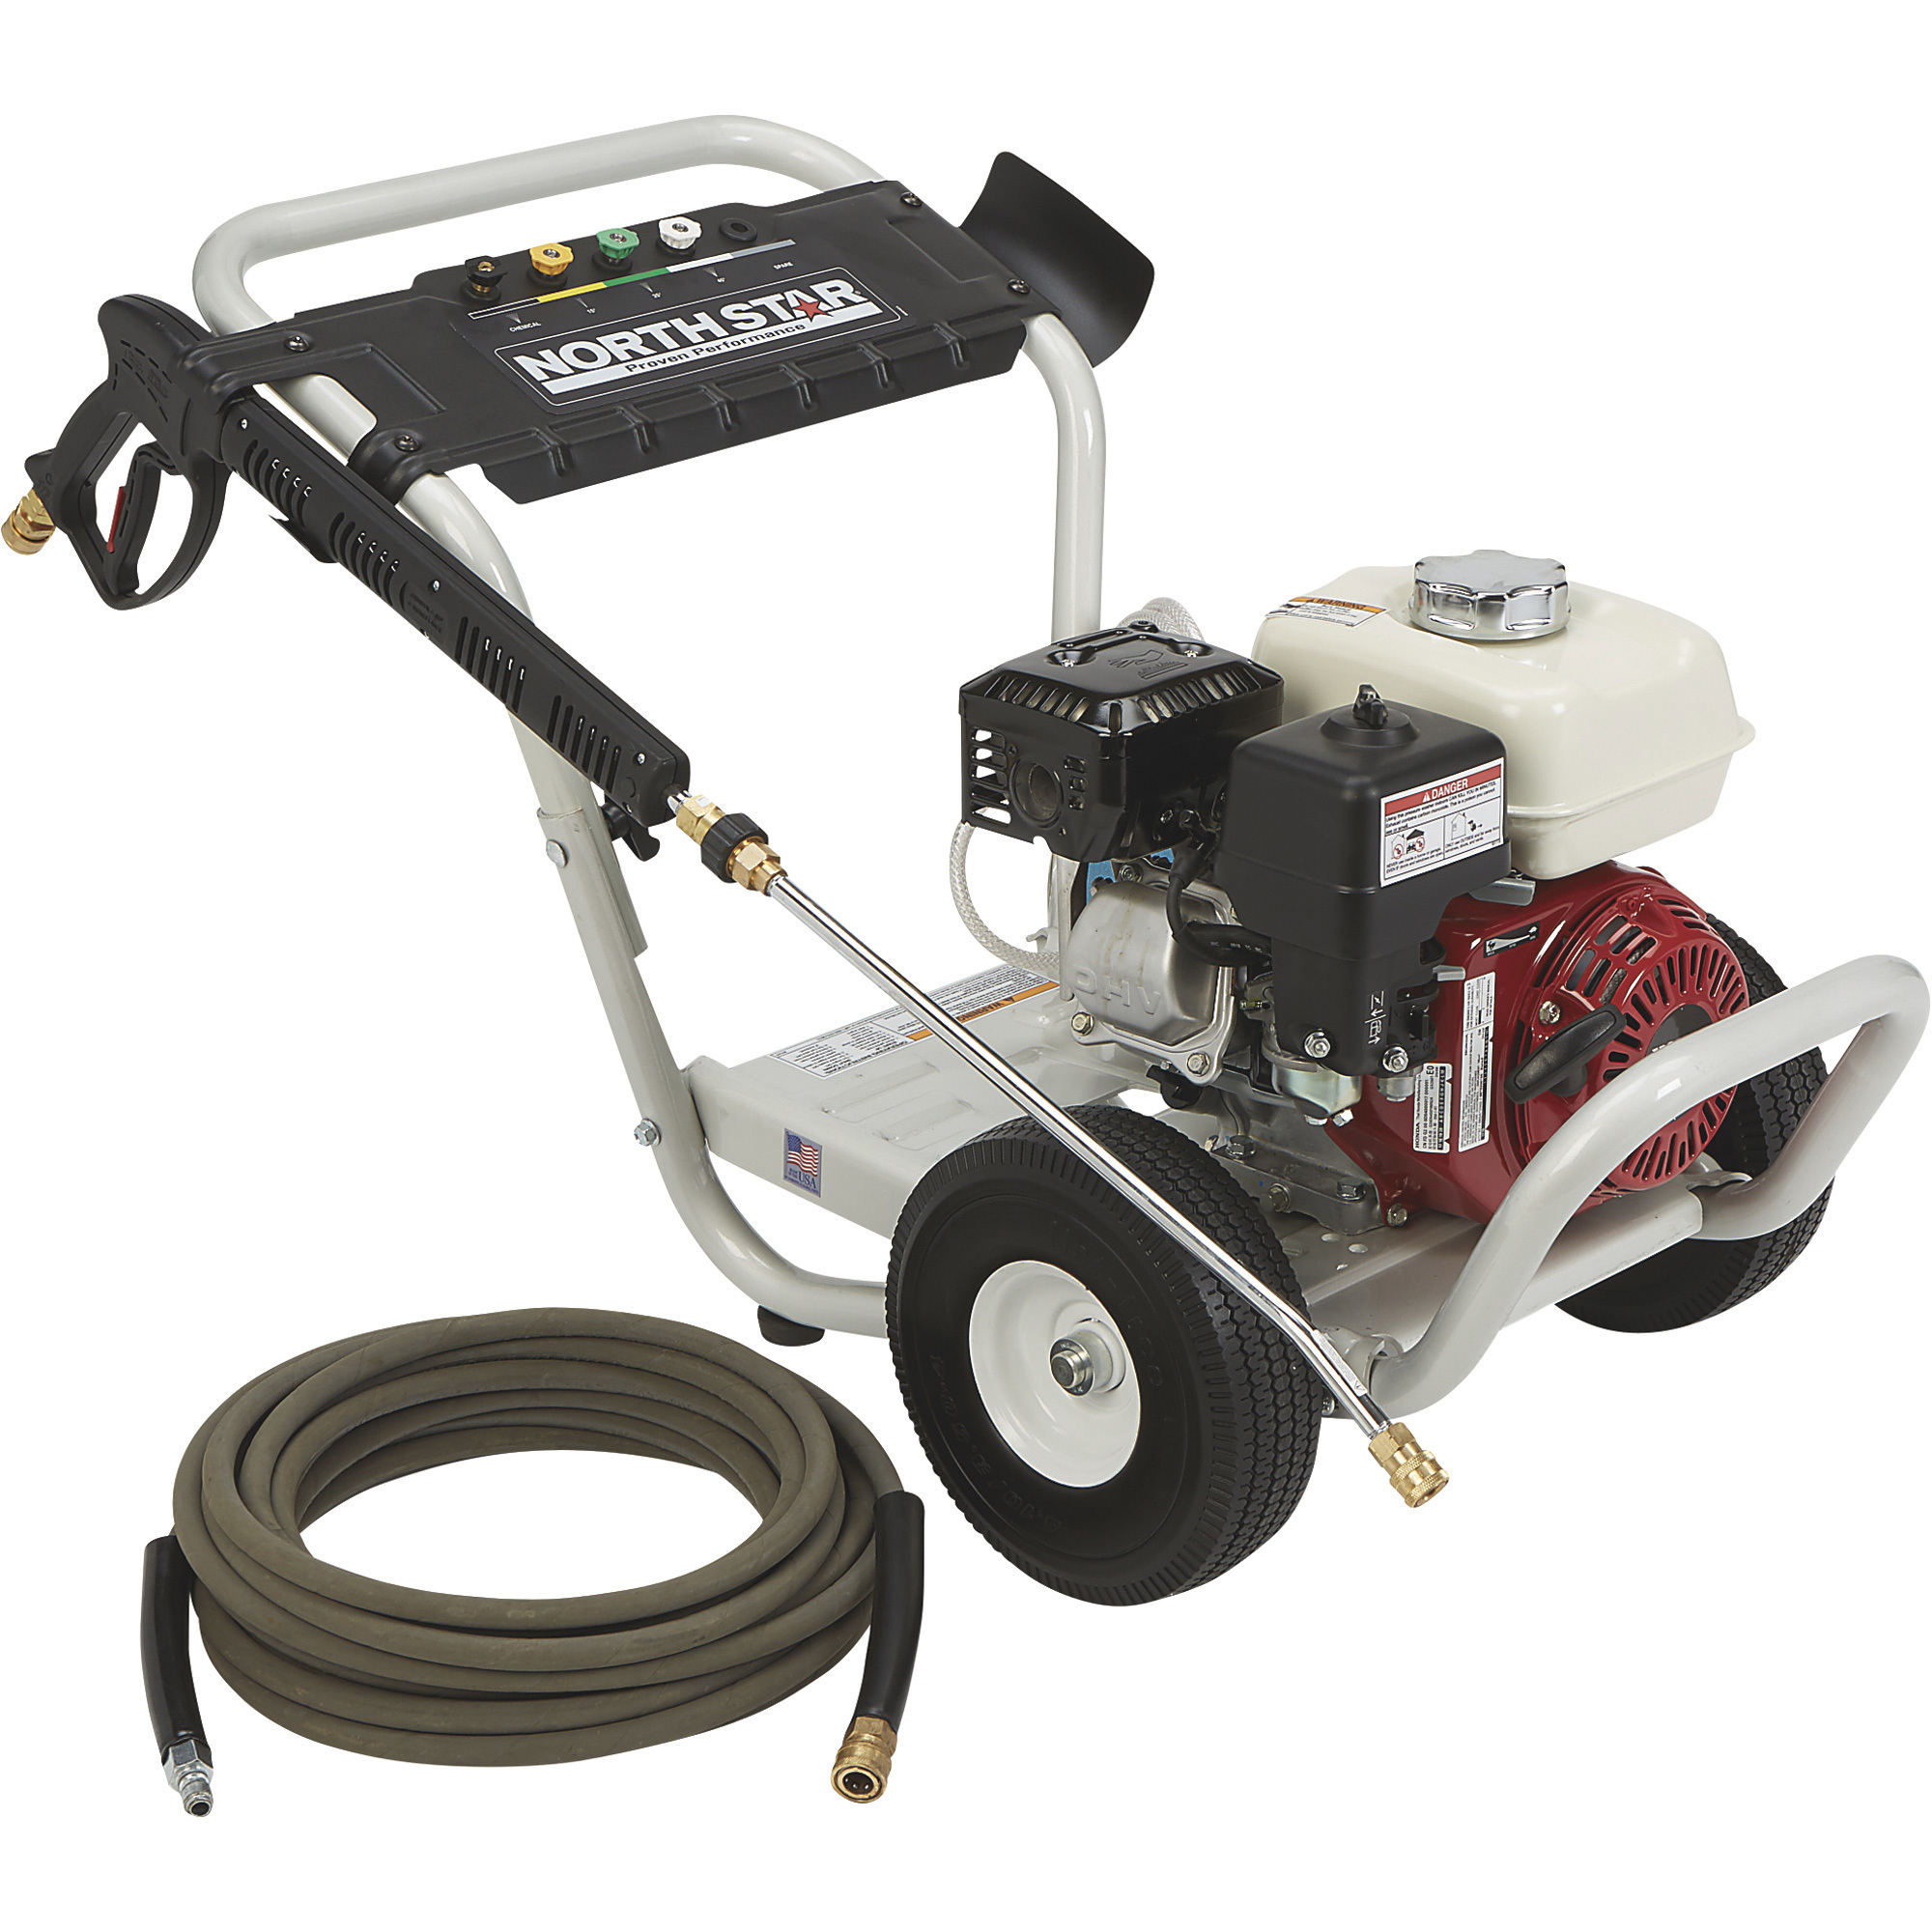 NorthStar Gas Cold Water Pressure Washer, 3300 PSI, 2.5 GPM, Honda Engine, Aircraft-Grade Aluminum Frame, Model 157132